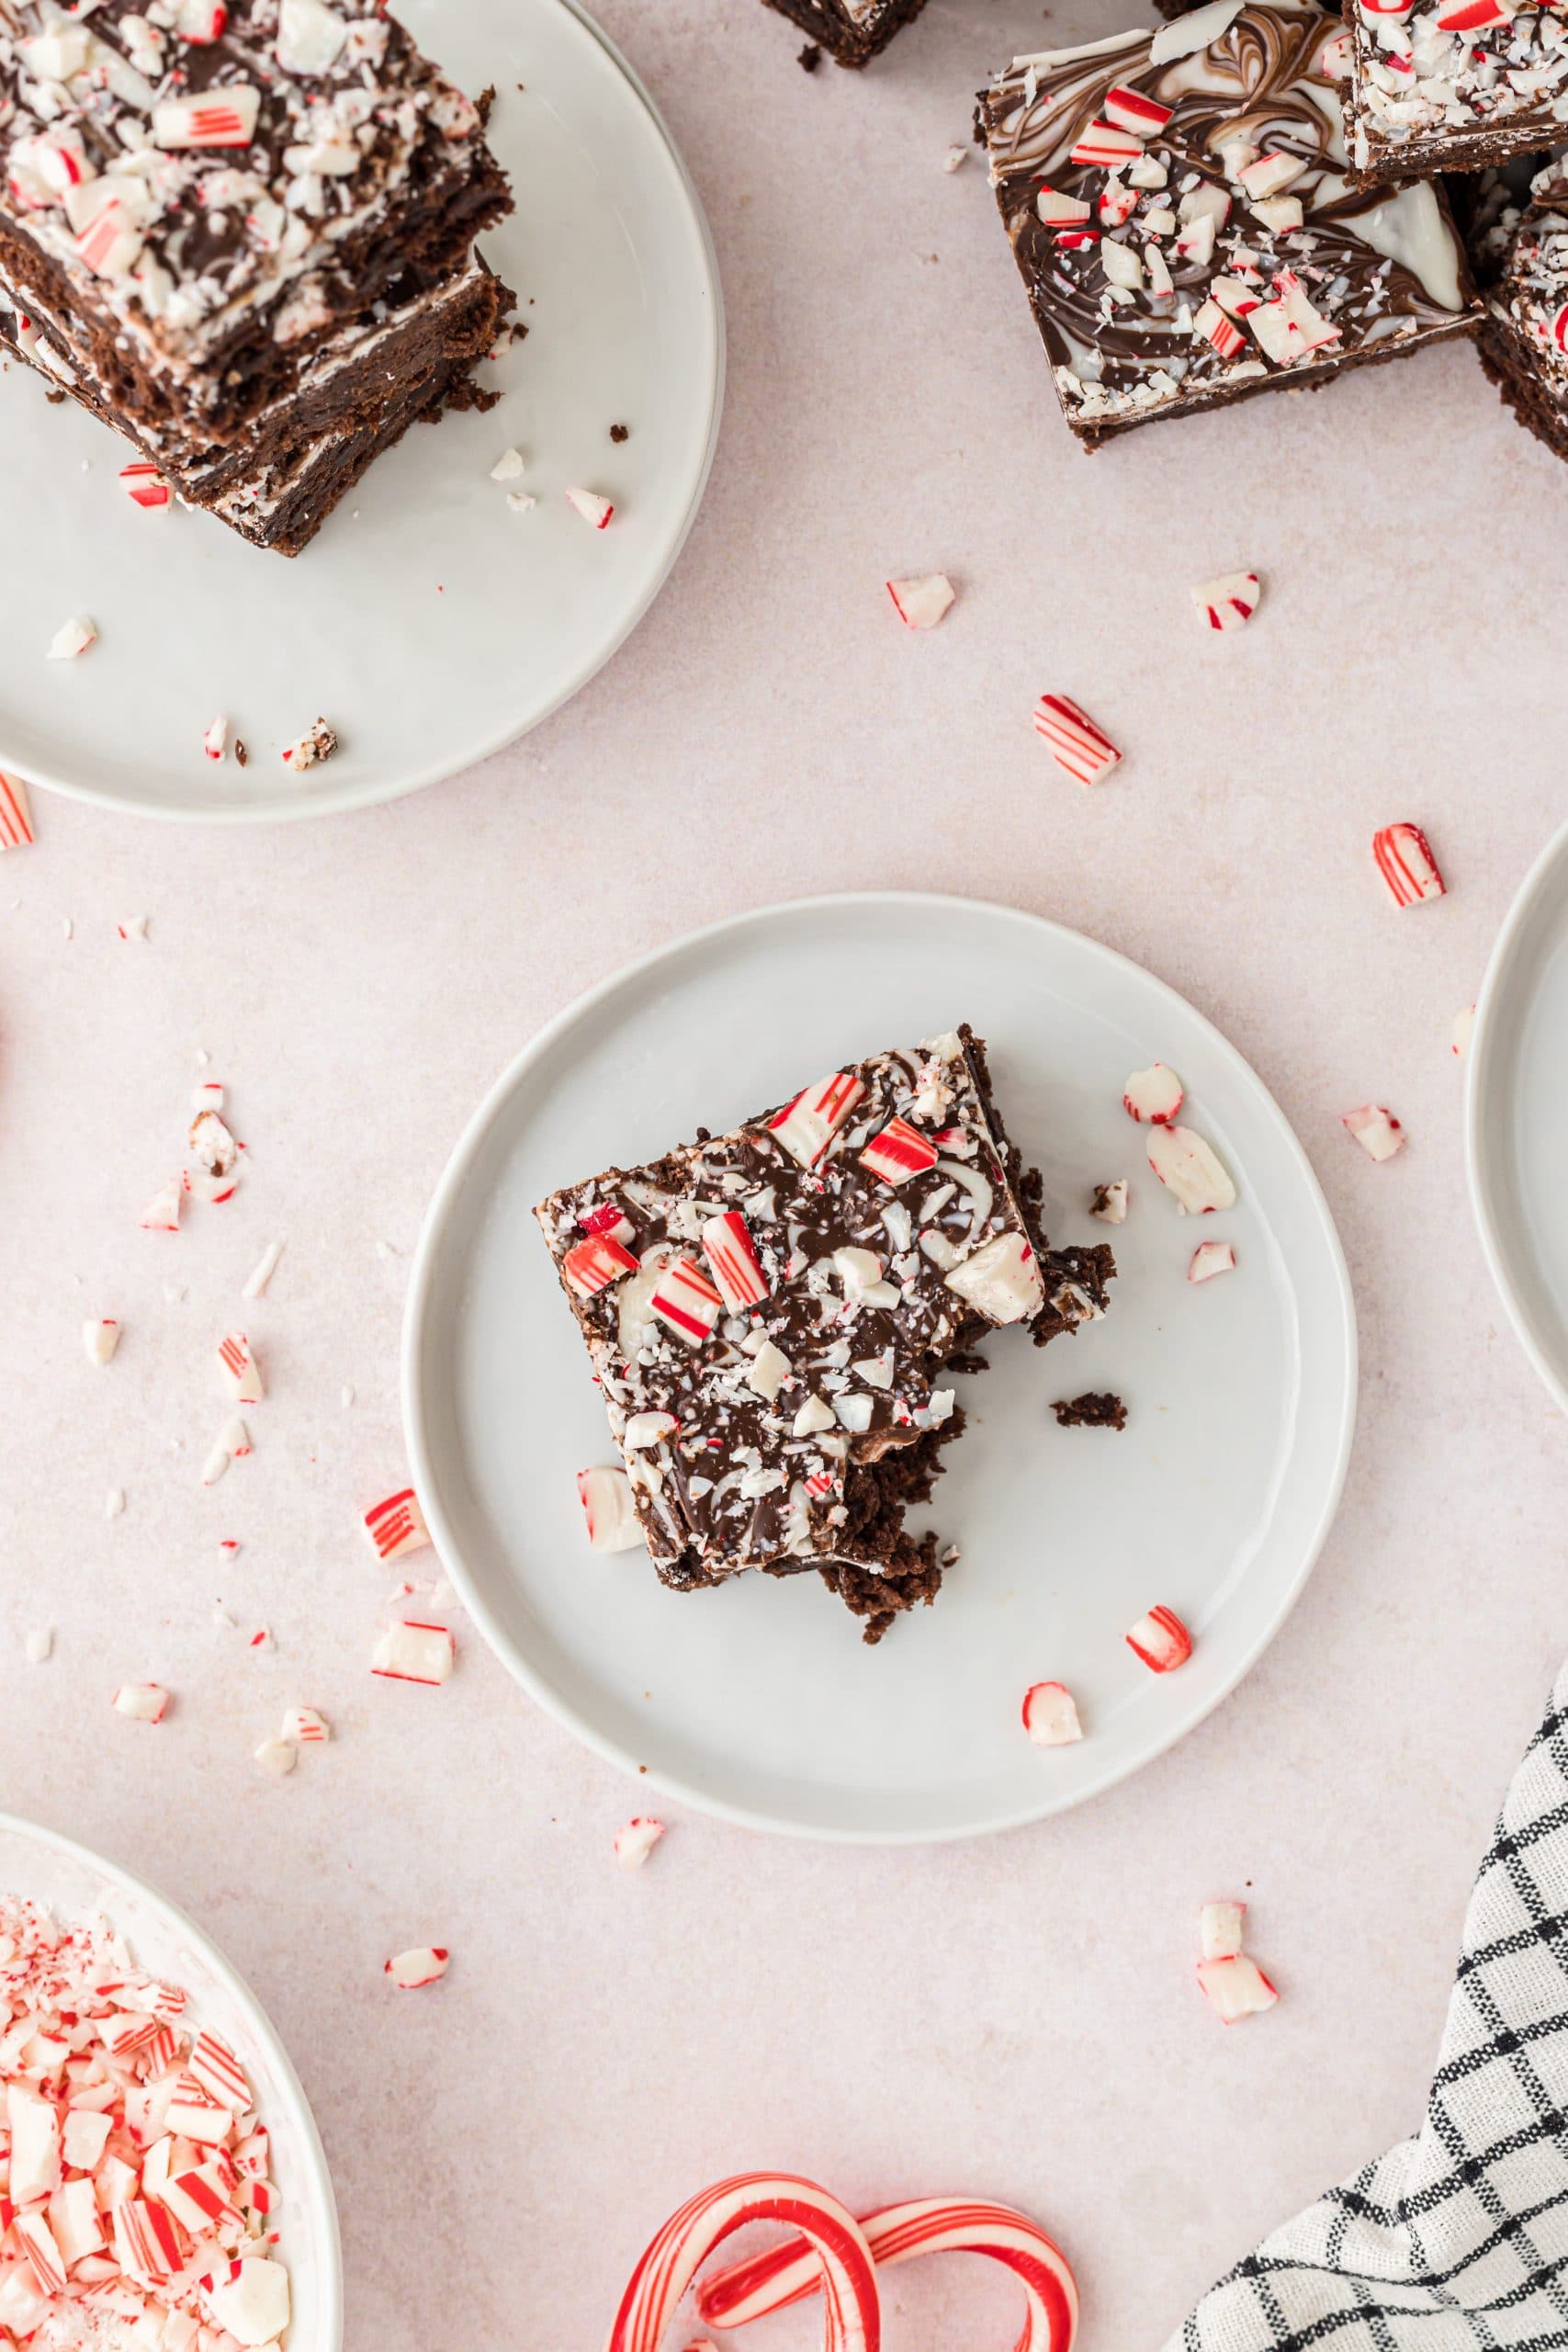 Bite of brownie with crushed candy canes on top.